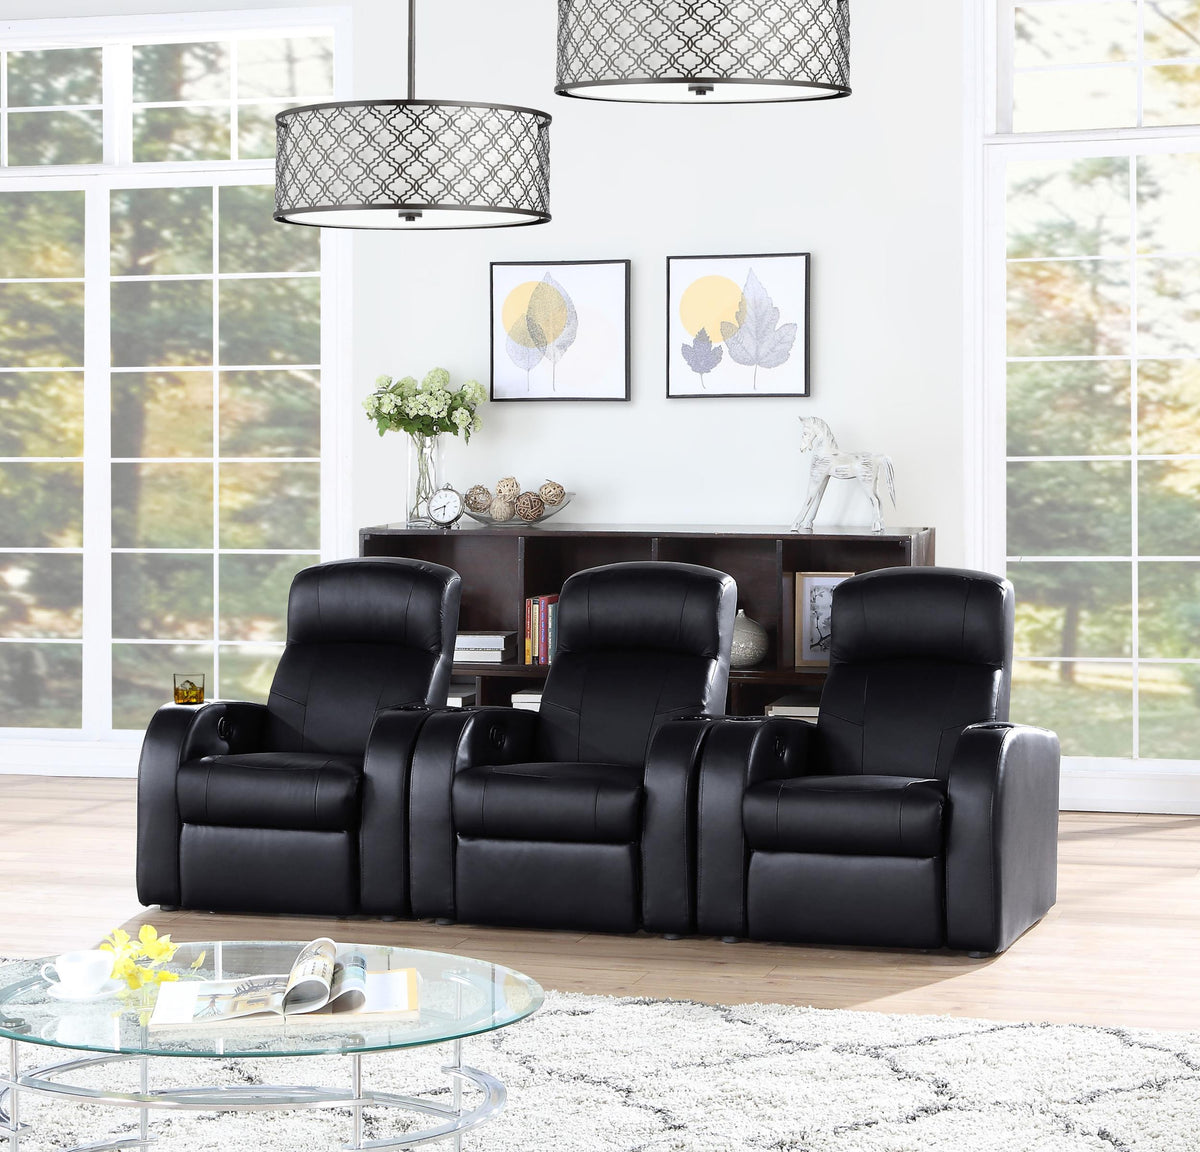 Cyrus Upholstered Recliner Home Theater Set Cyrus Upholstered Recliner Home Theater Set Half Price Furniture